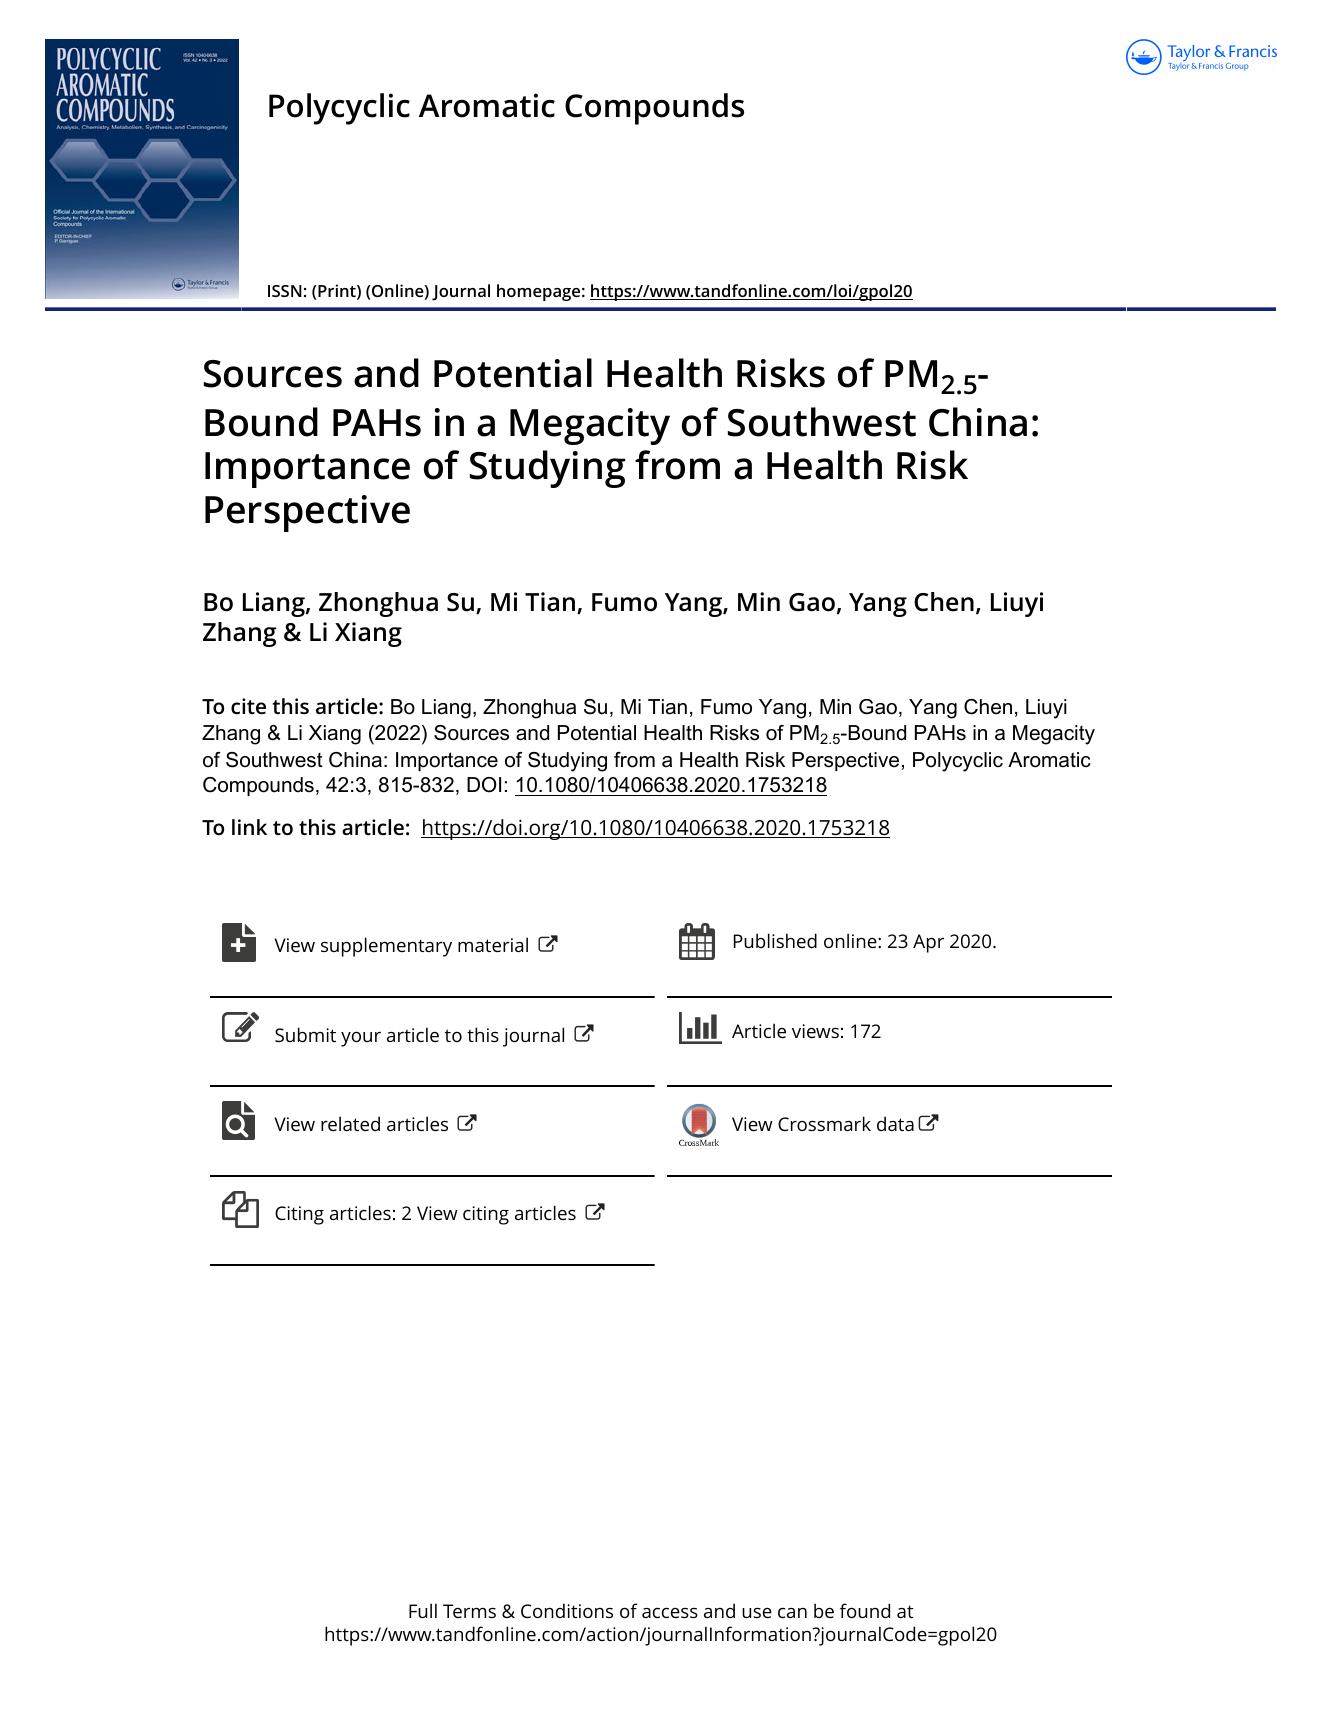 Sources and Potential Health Risks of PM2.5-Bound PAHs in a Megacity of Southwest China: Importance of Studying from a Health Risk Perspective by Liang Bo & Su Zhonghua & Tian Mi & Yang Fumo & Gao Min & Chen Yang & Zhang Liuyi & Xiang Li